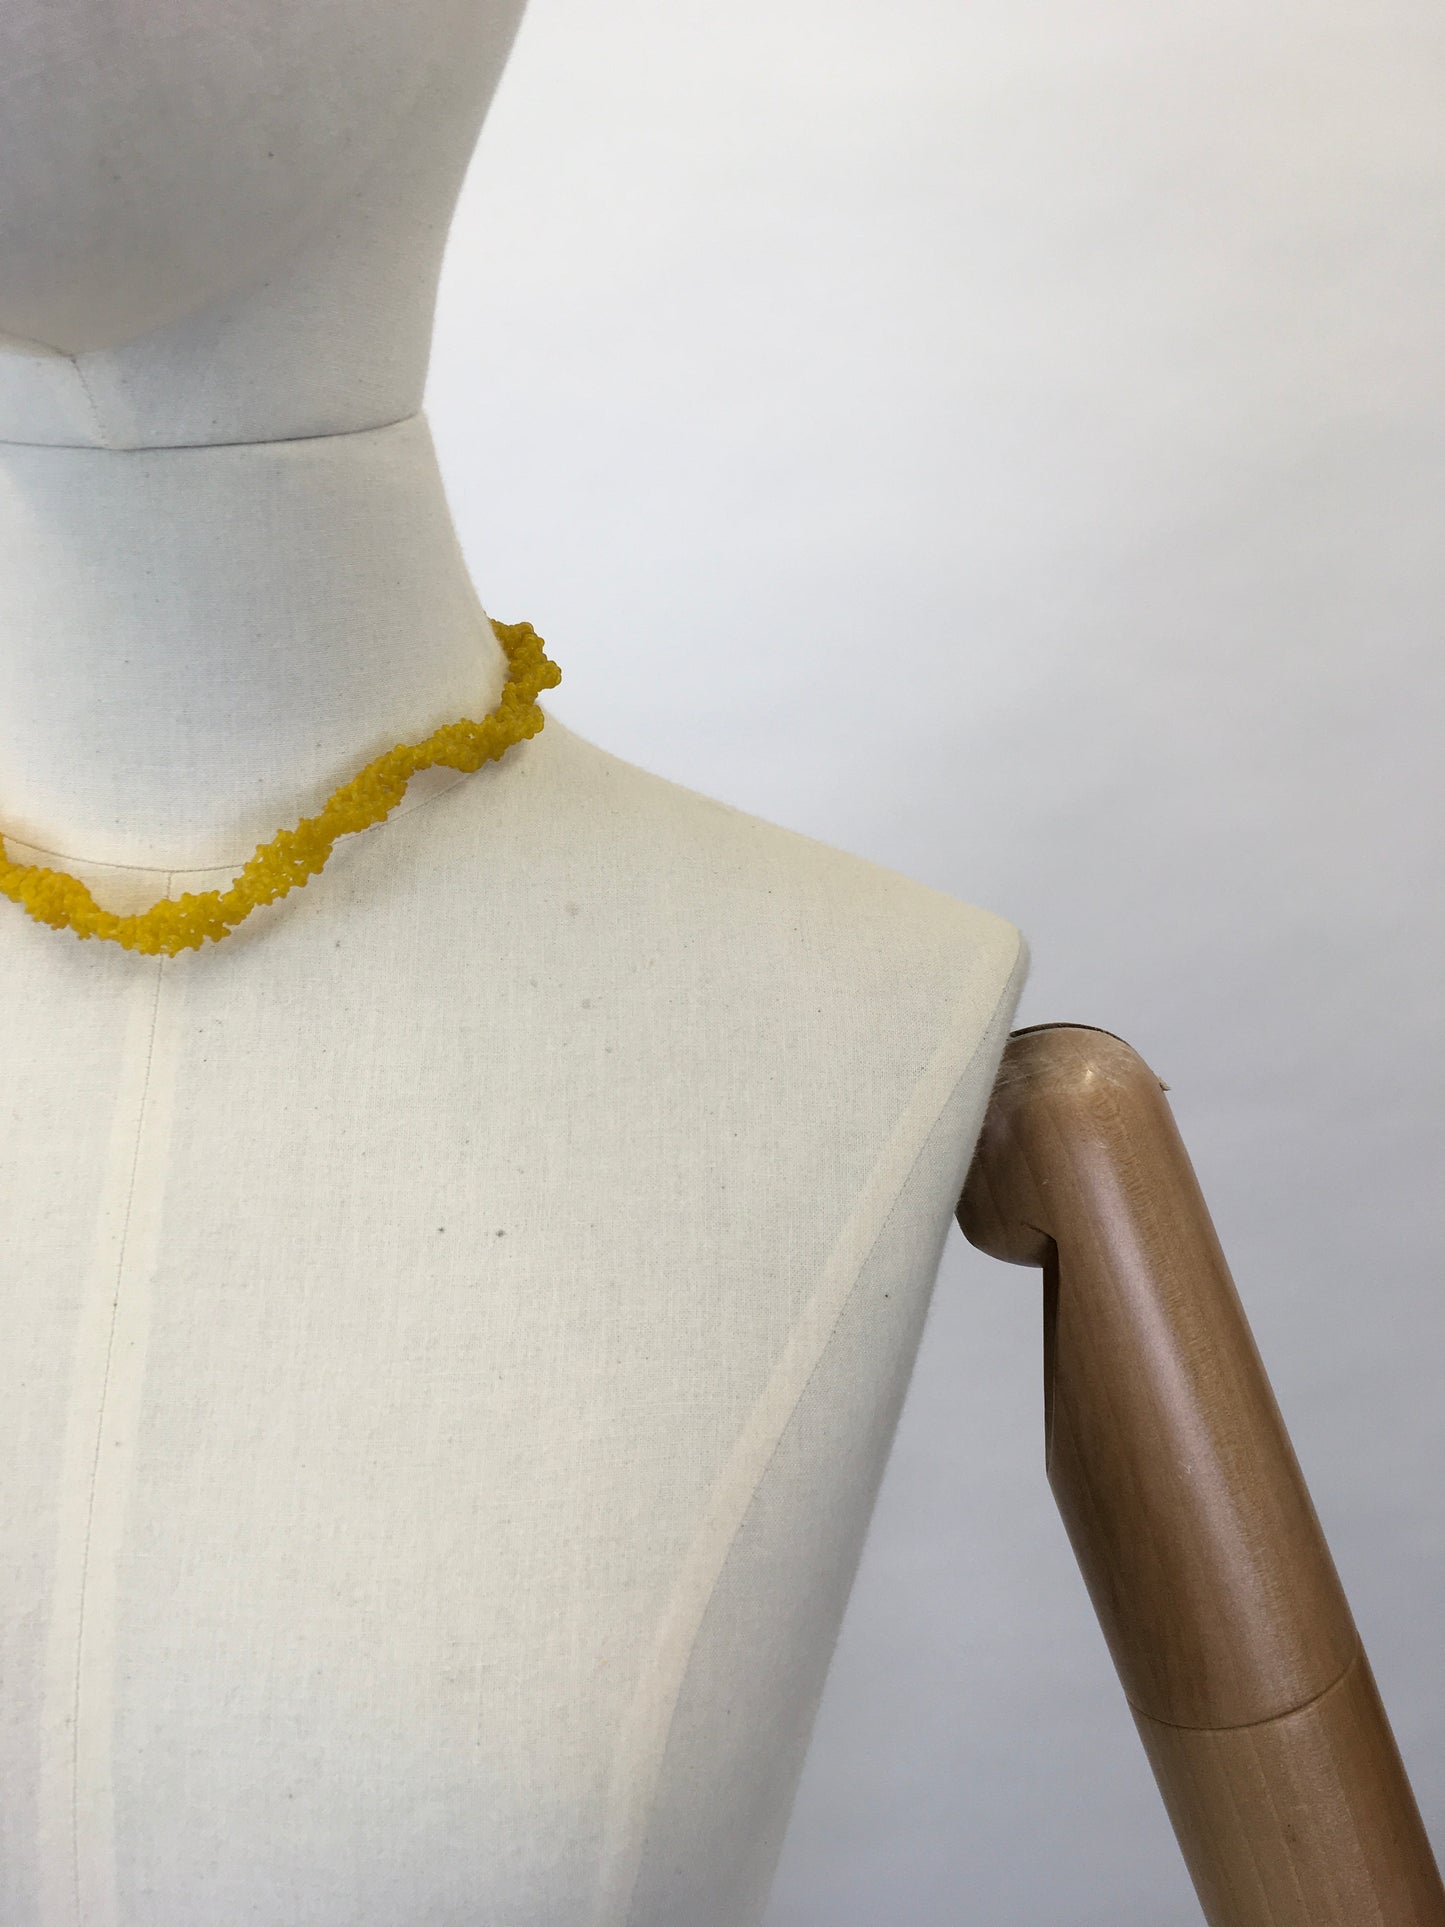 Original Early 1950’s ‘ Scoobie ‘ Necklace - In a Gorgeous Sunshine Yellow